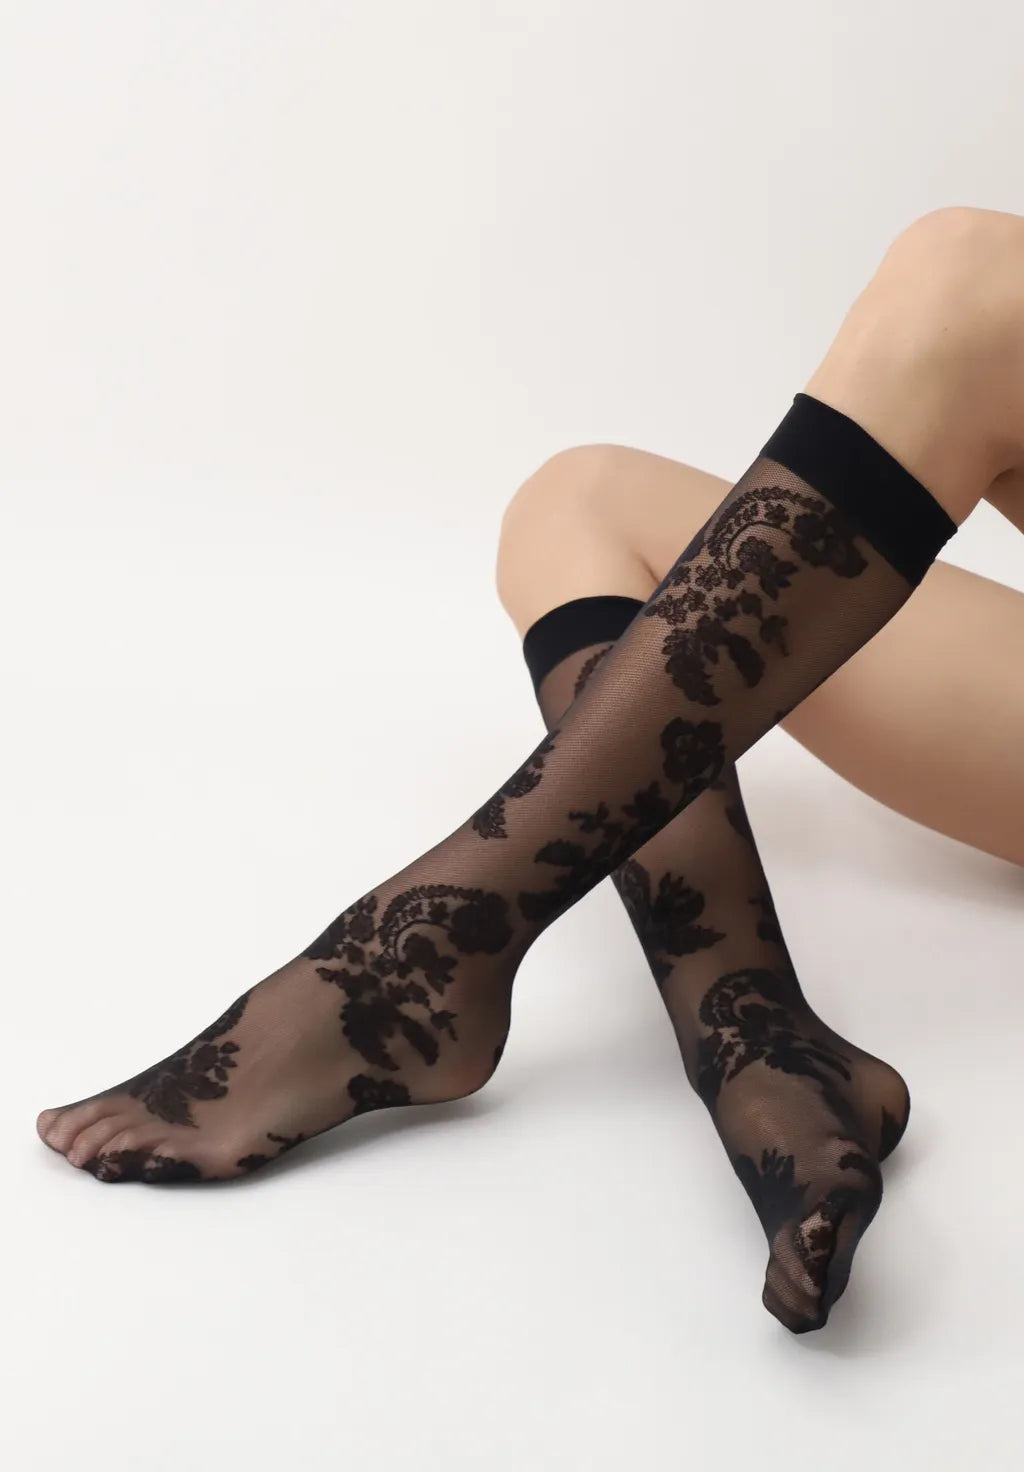 Oroblù Paisley Gambaletto - Sheer black fashion knee-high socks with a paisley lace style pattern and deep comfort cuff.